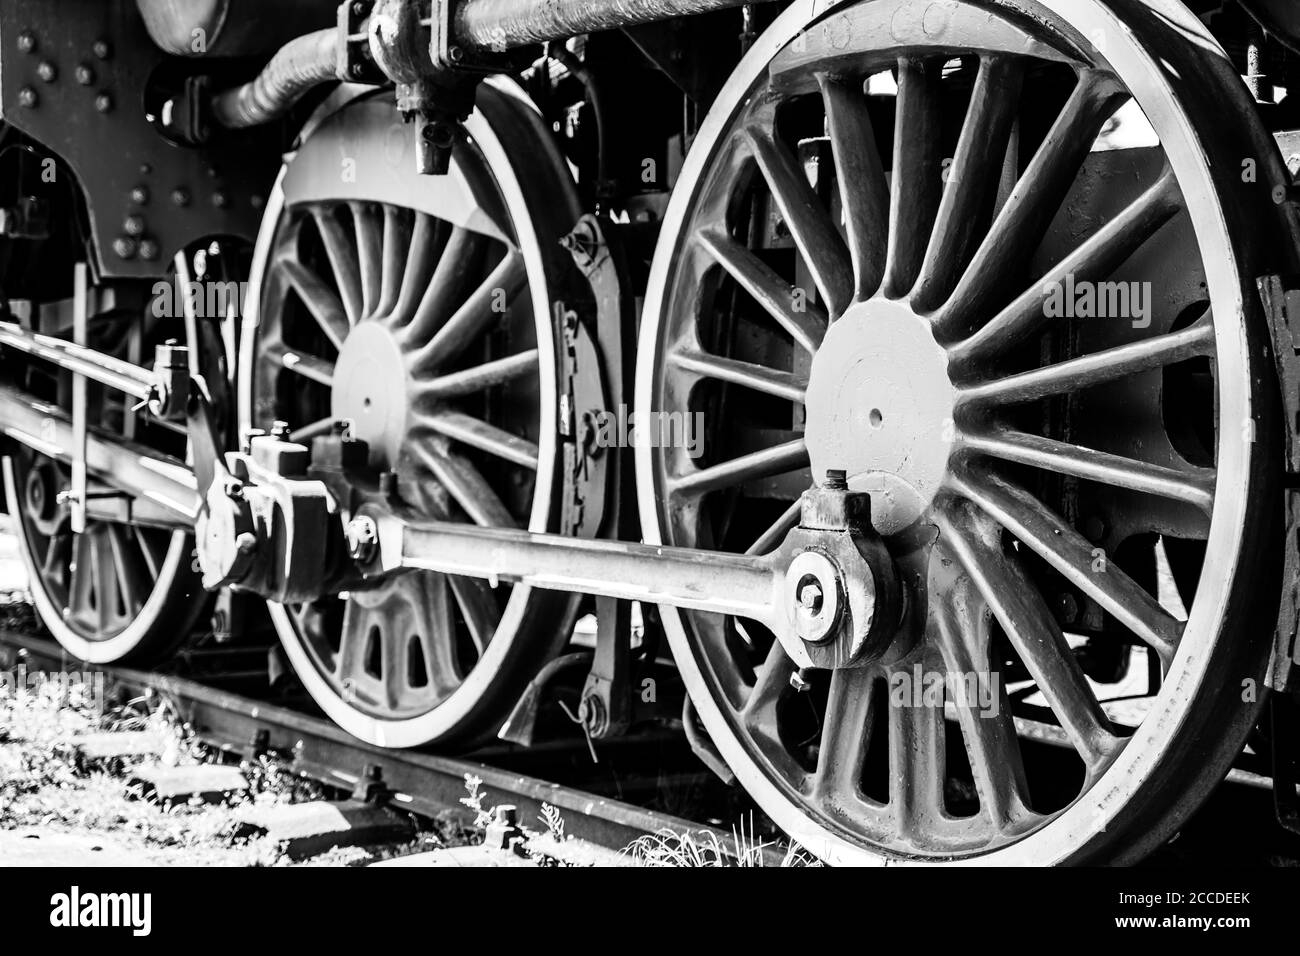 Huge vintage steam locomotive, red painted steel wheel detail close up. Coal-powered steam train on a siding. Classic gigantic heavy railway machinery Stock Photo